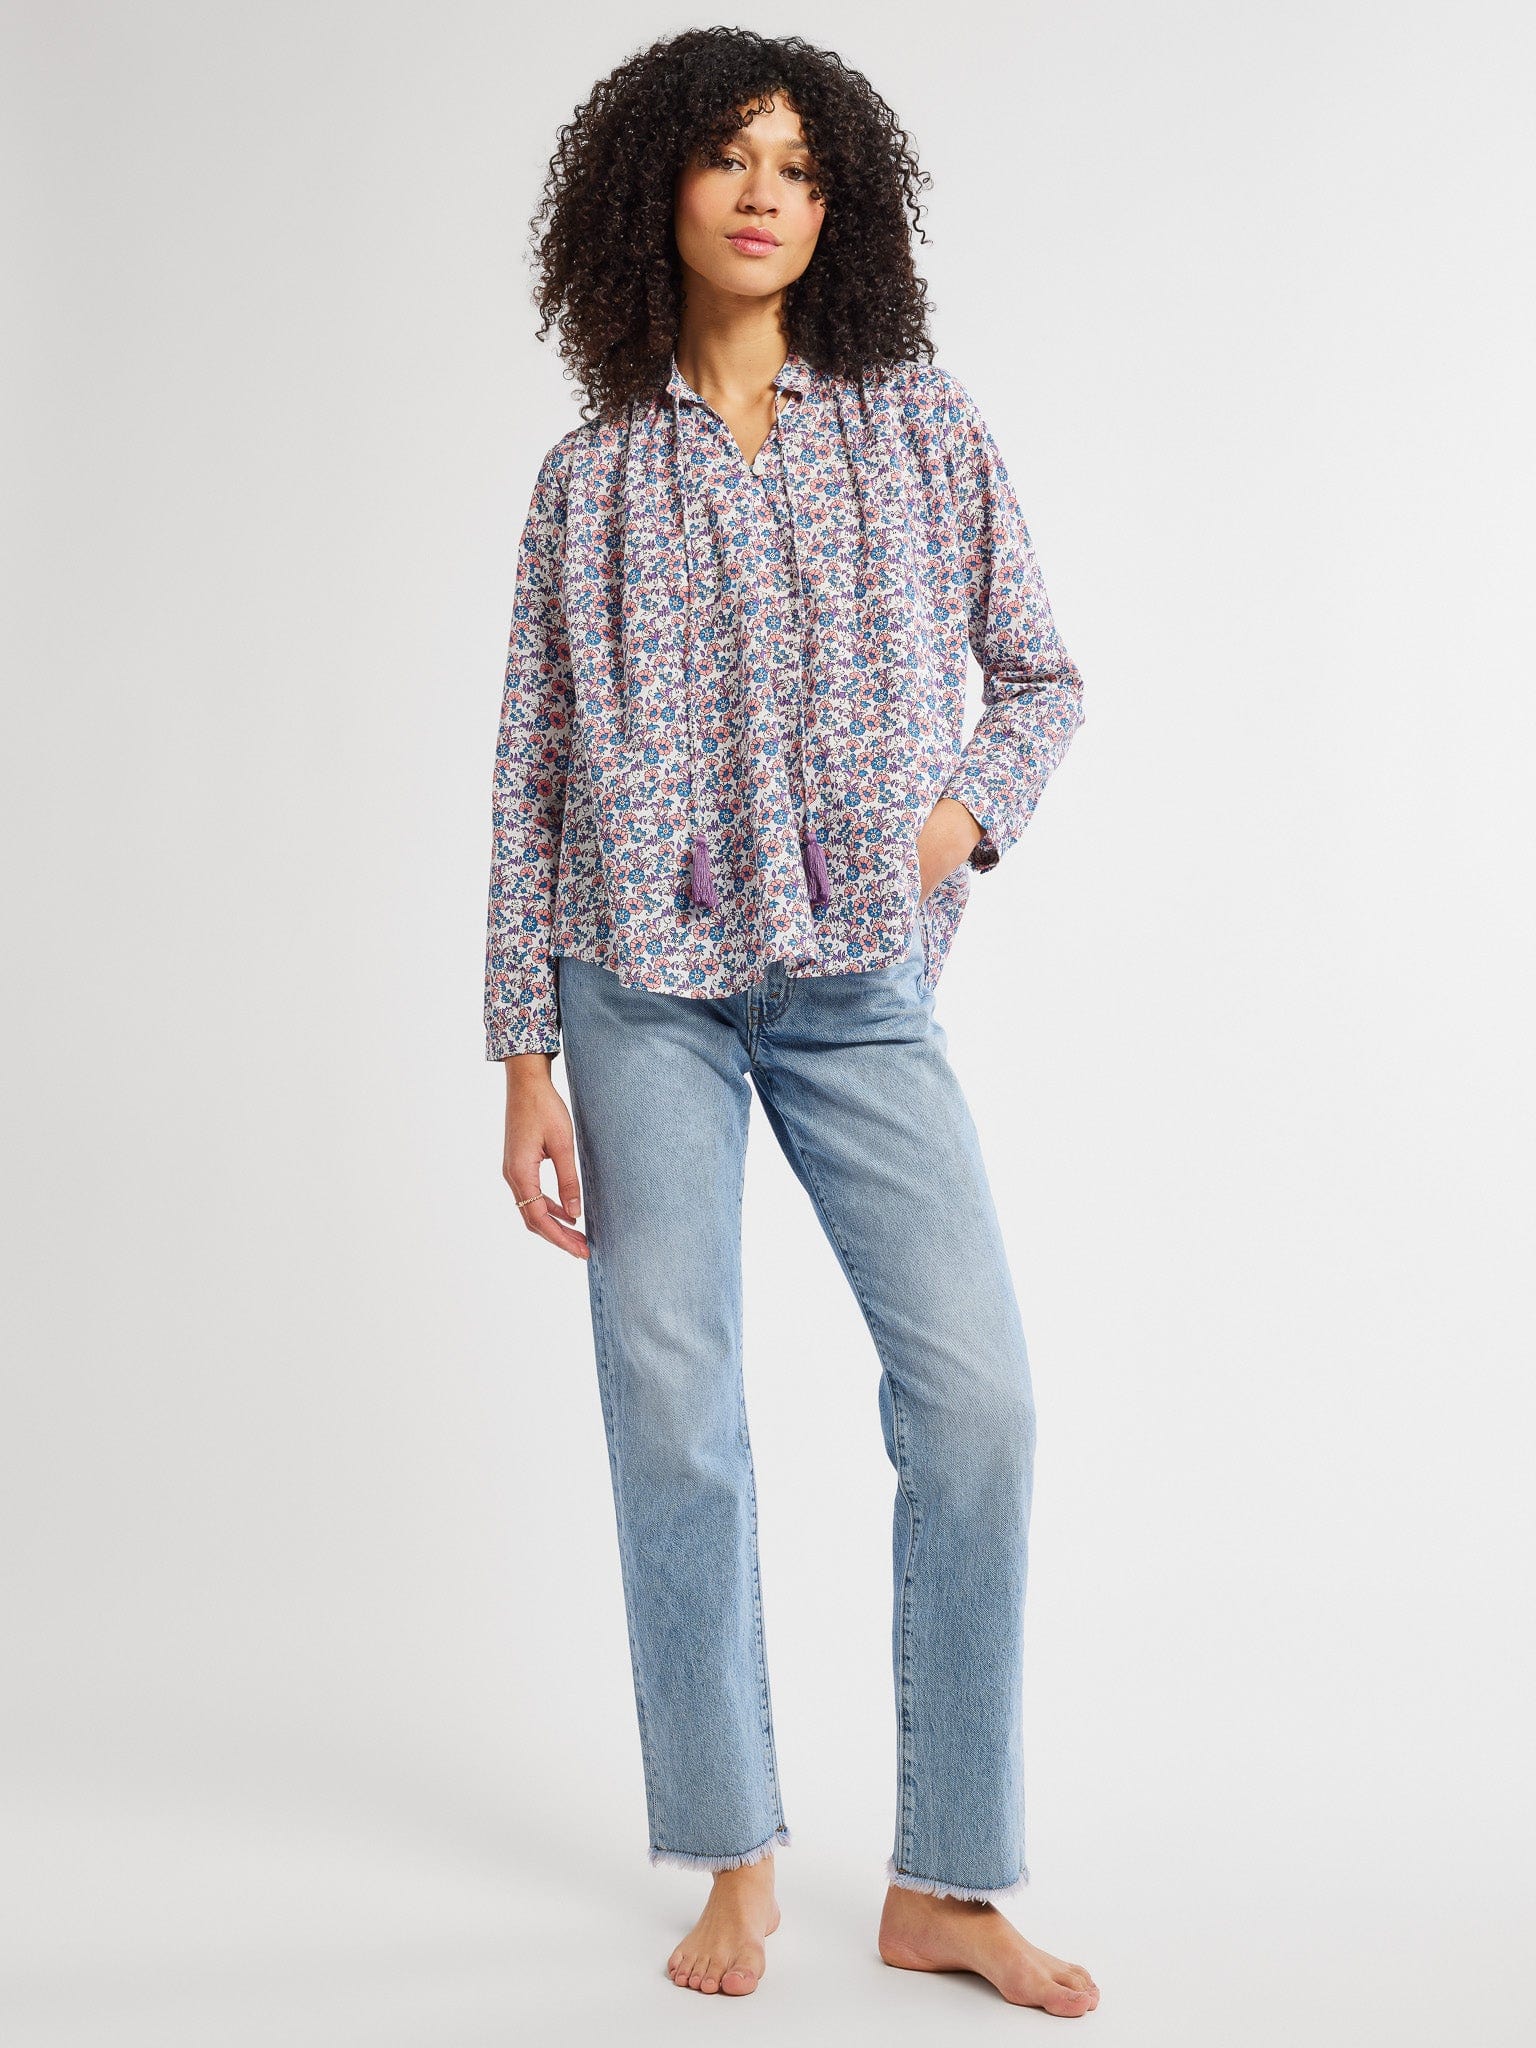 MILLE Clothing Joni Top in Bluebell